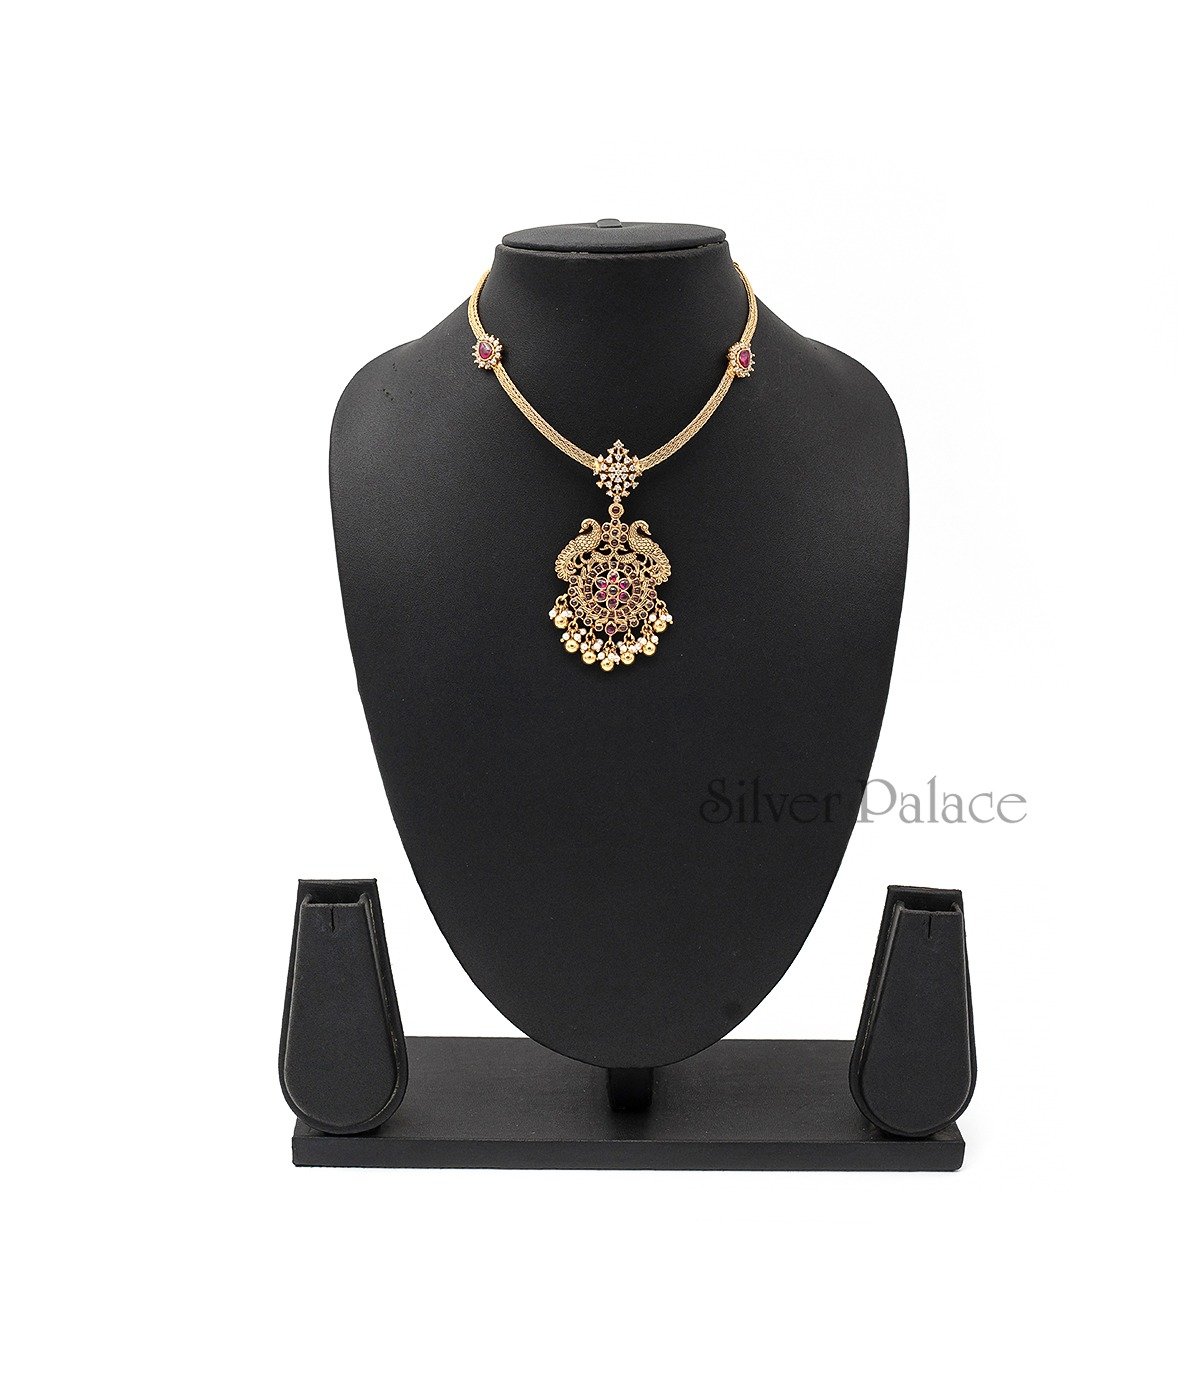 GOLD POLISHED PEACOCK PENDANT THICK CHAINED NECKLACE - GPN